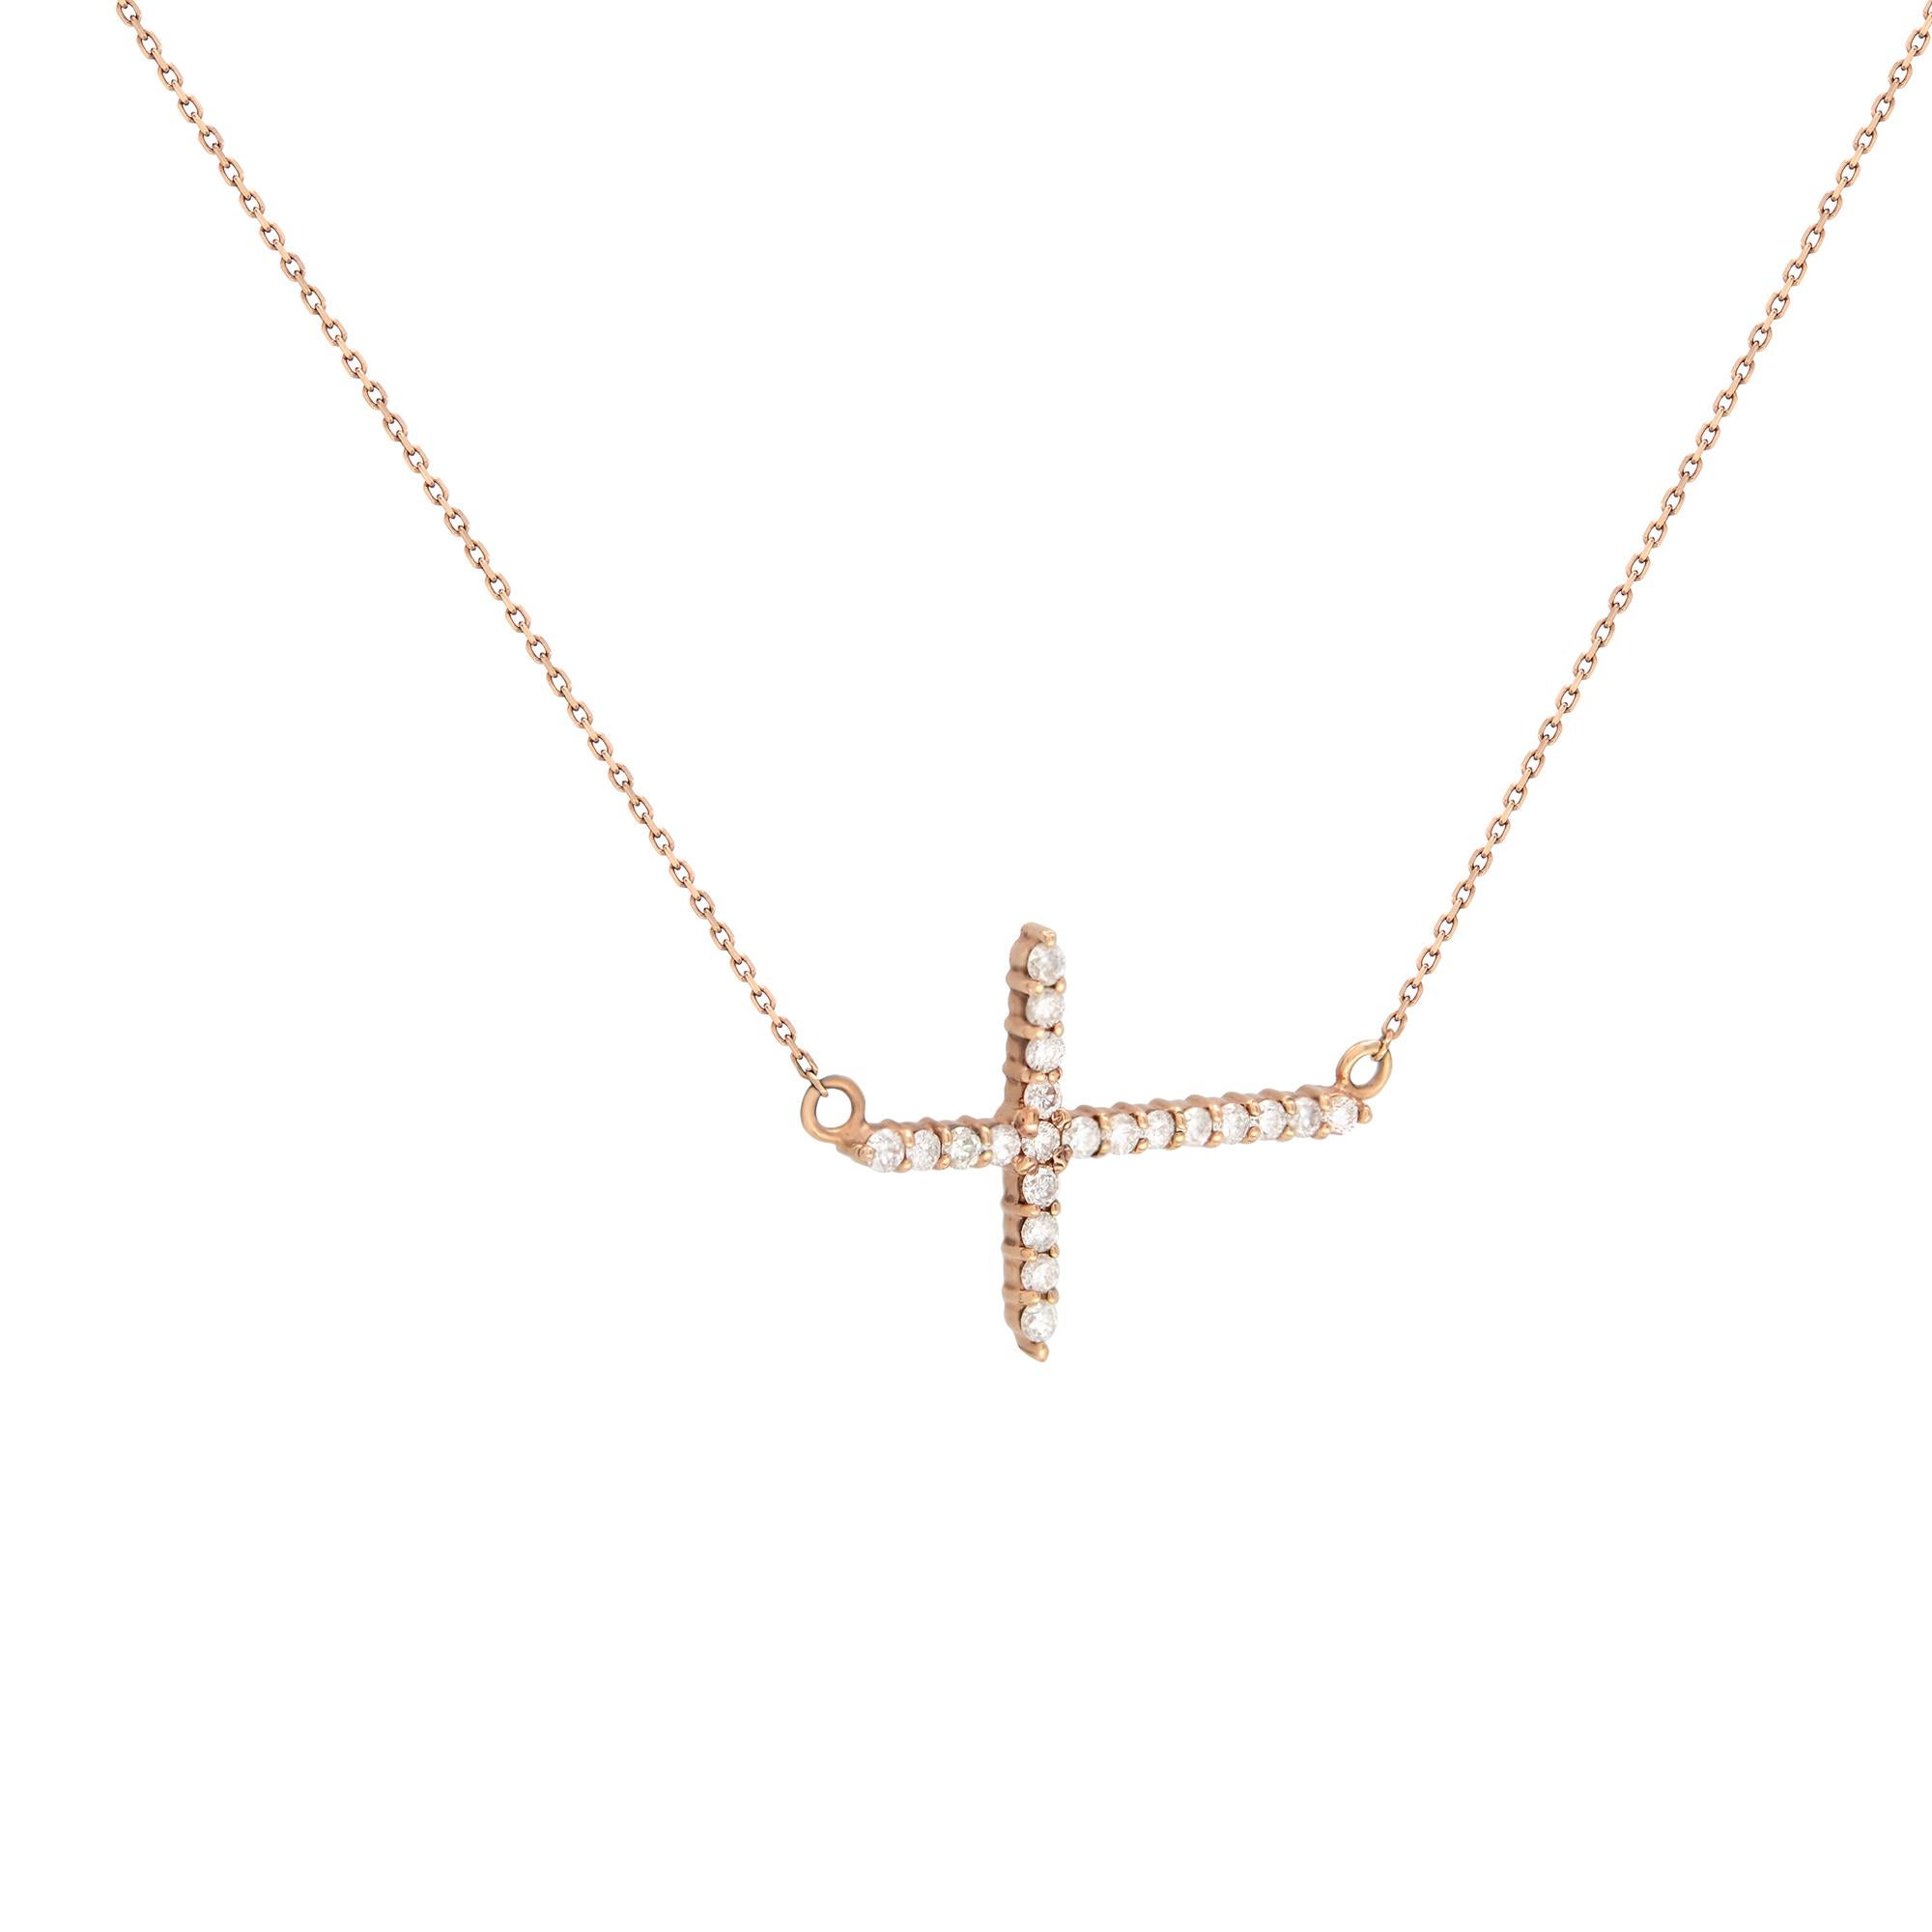 A delicate diamond 0.28cttw side way cross pendant. Includes 21 tiny brilliant round cut diamonds. Diamond color G-H Color and VS-SI Clarity. The diamonds are beautifully set in a prong setting. Cross size:  20x15mm. Thickness: 1.75mm. Chain length: